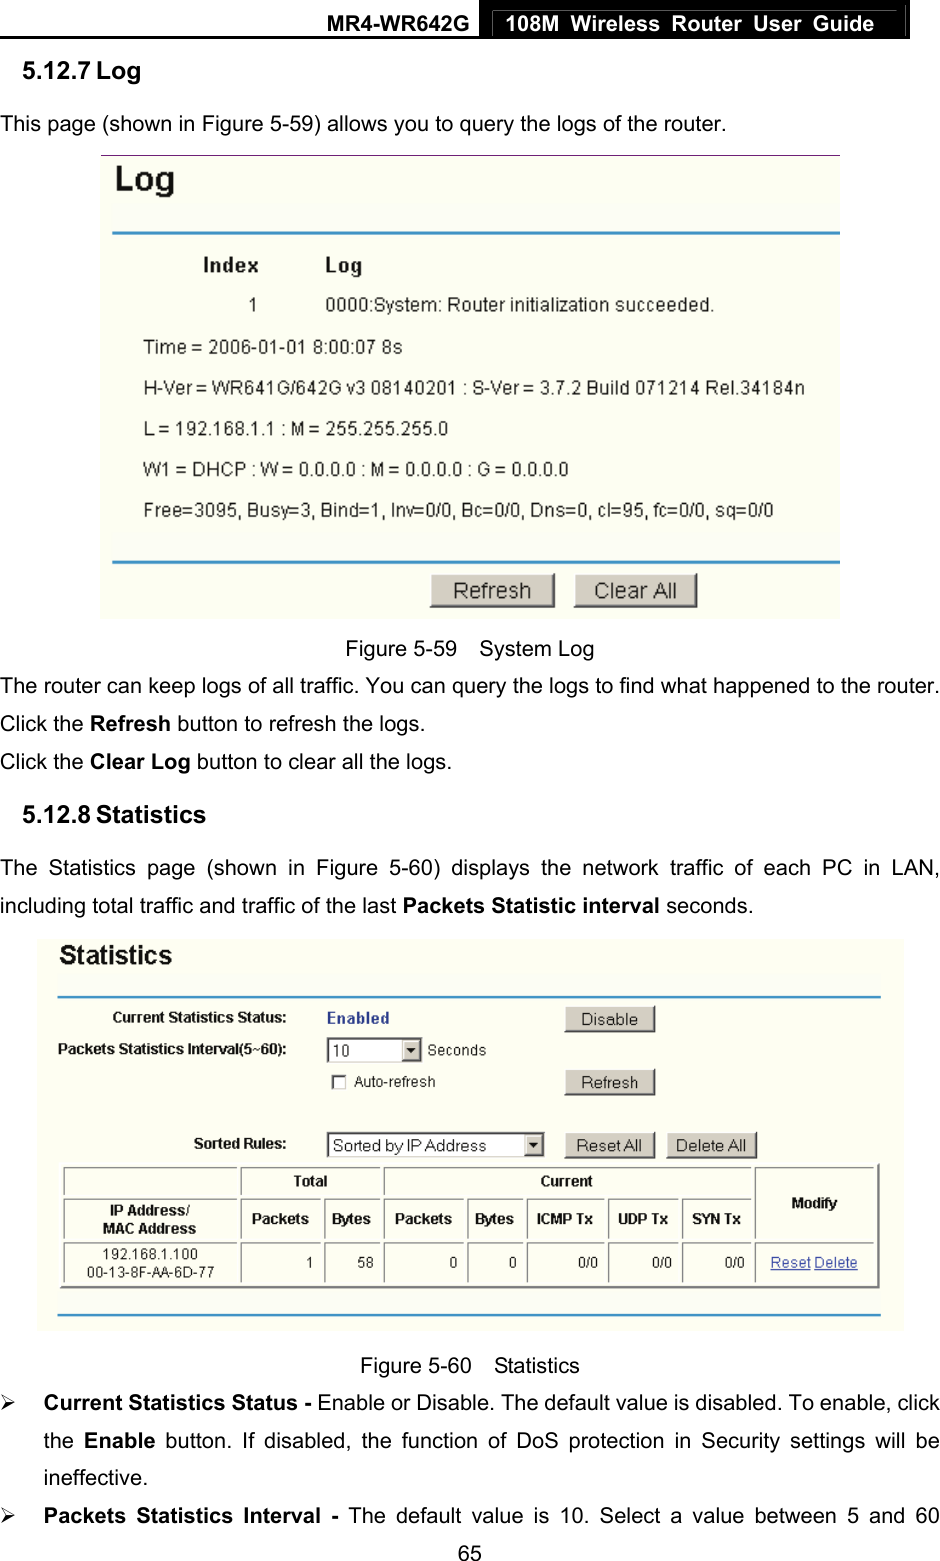 MR4-WR642G 108M Wireless Router User Guide   655.12.7 Log This page (shown in Figure 5-59) allows you to query the logs of the router.    Figure 5-59  System Log The router can keep logs of all traffic. You can query the logs to find what happened to the router. Click the Refresh button to refresh the logs. Click the Clear Log button to clear all the logs. 5.12.8 Statistics The Statistics page (shown in Figure 5-60) displays the network traffic of each PC in LAN, including total traffic and traffic of the last Packets Statistic interval seconds.    Figure 5-60  Statistics ¾ Current Statistics Status - Enable or Disable. The default value is disabled. To enable, click the  Enable button. If disabled, the function of DoS protection in Security settings will be ineffective.  ¾ Packets Statistics Interval - The default value is 10. Select a value between 5 and 60 